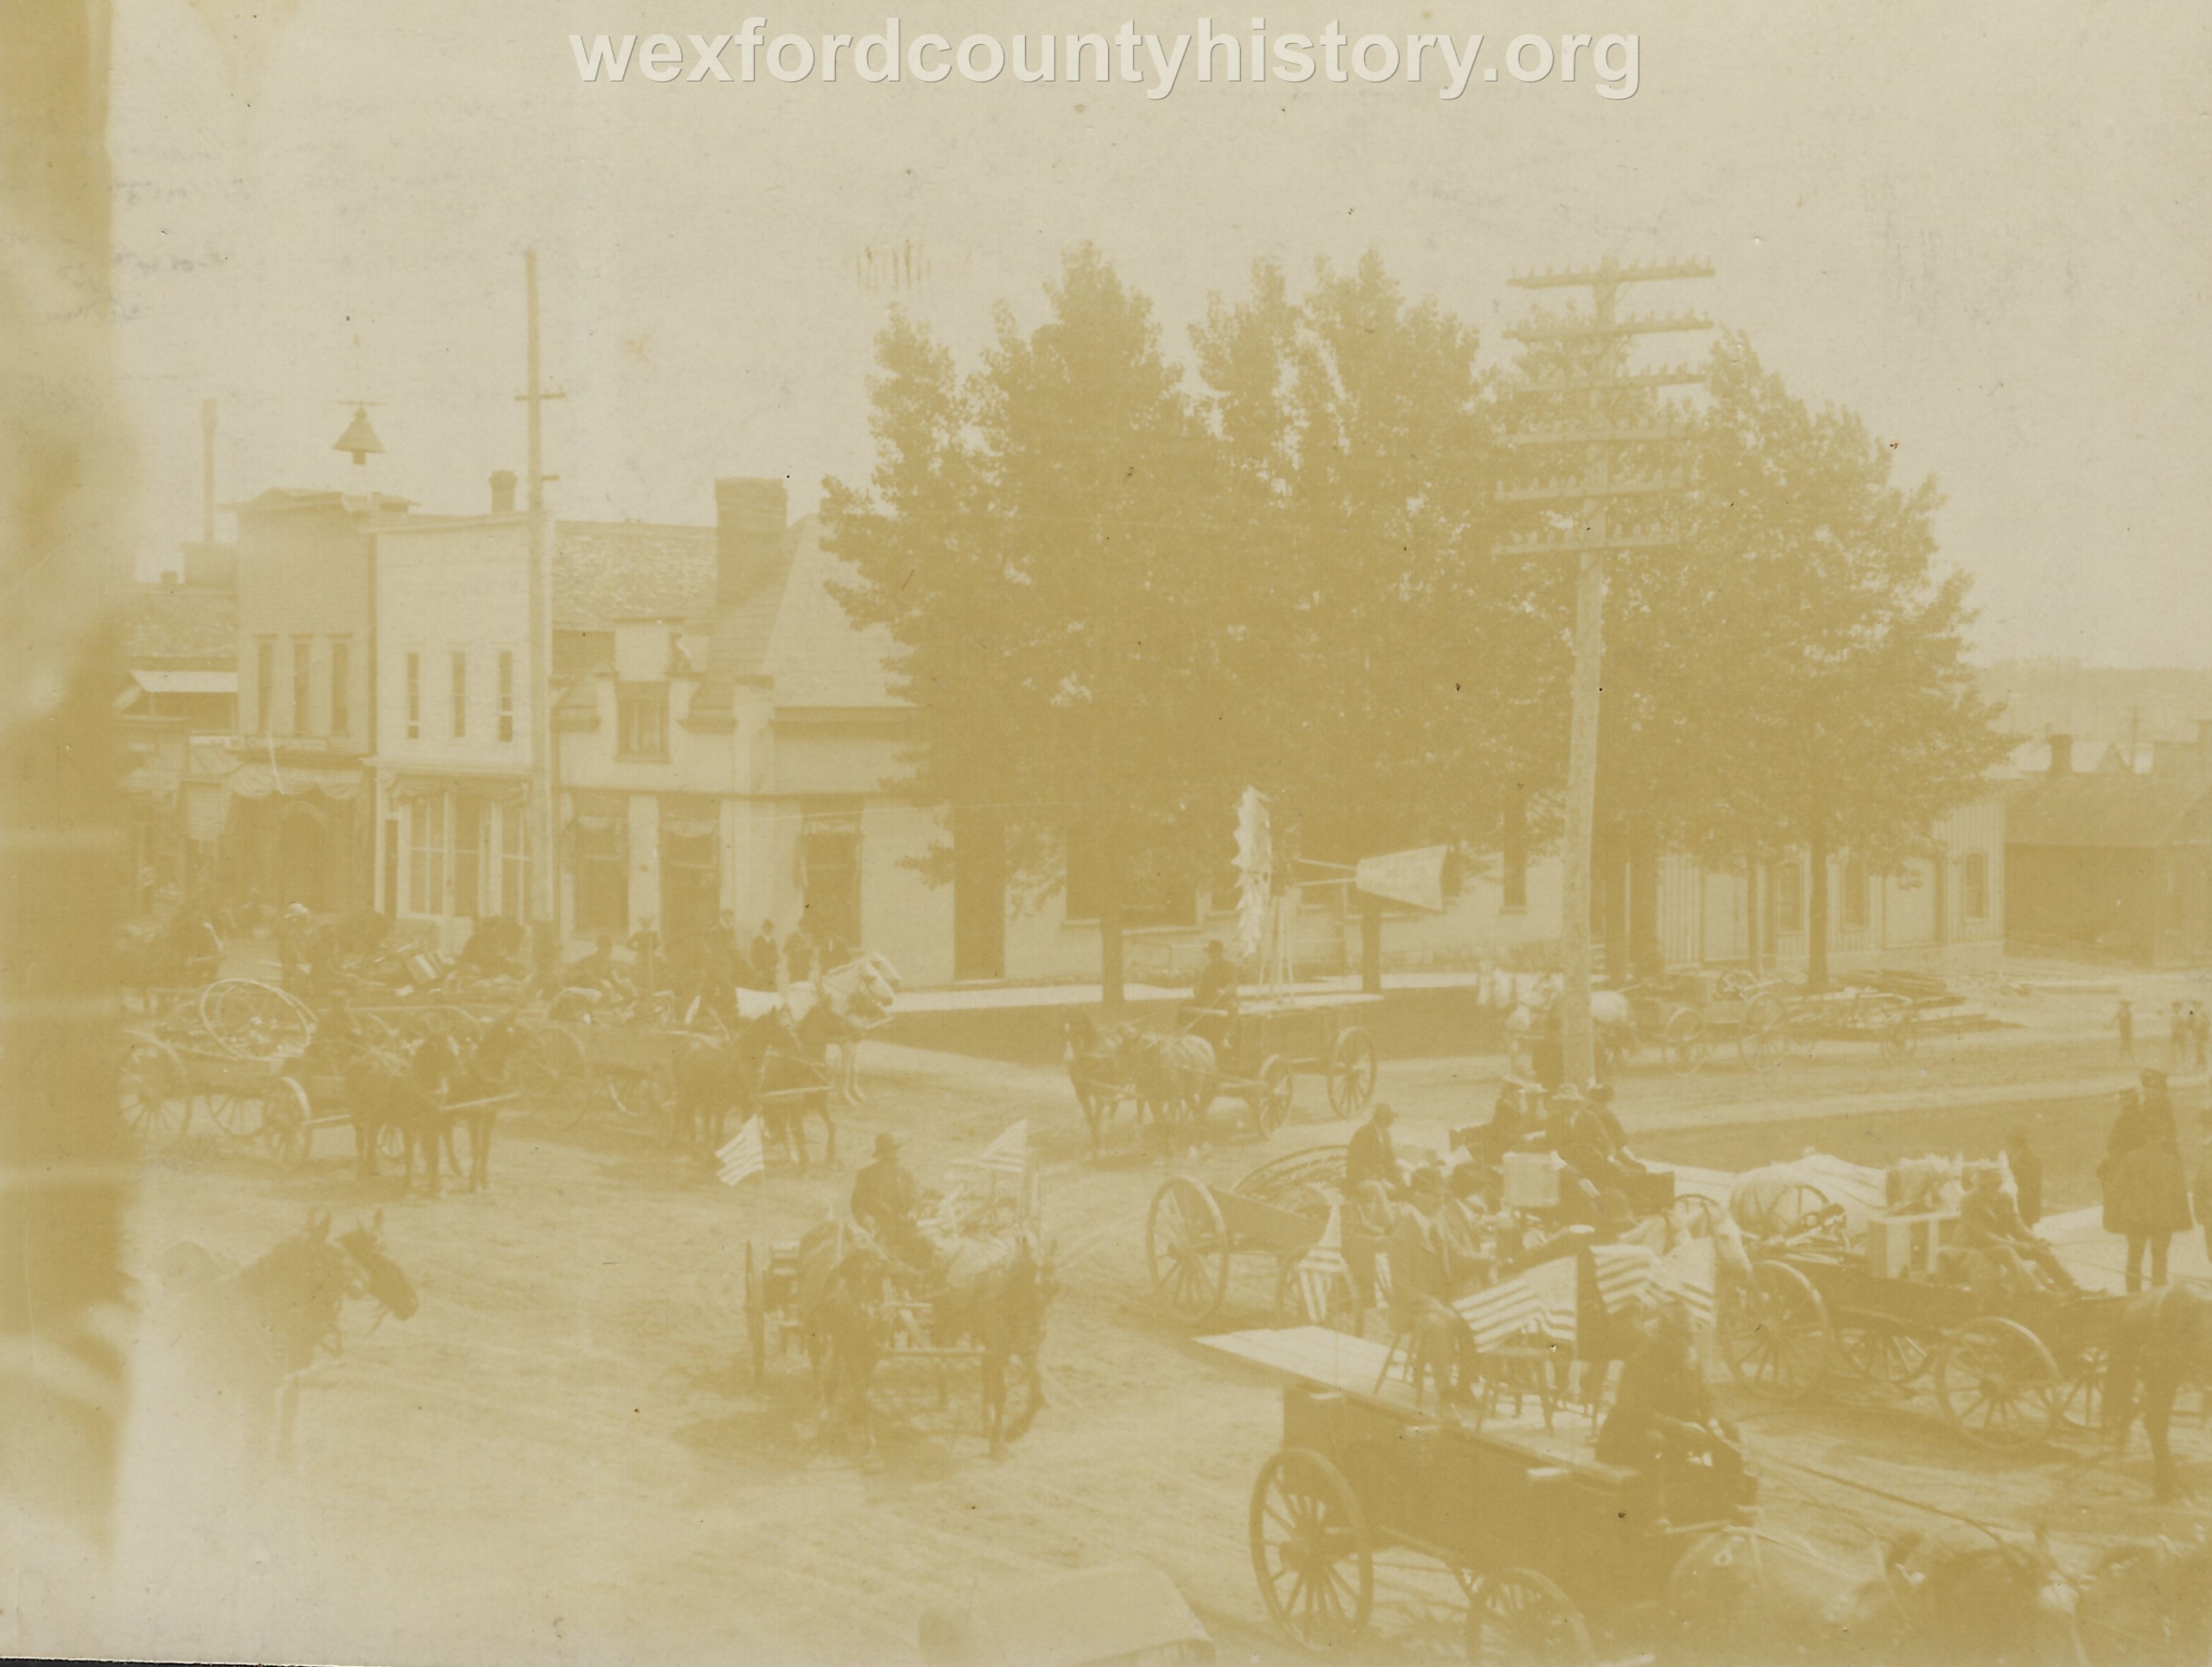 Cadillac-Parade-1902-Street-Fair-At-The-Intersection-Of-Cass-And-Mitchell-Streets-Showing-The-Southwest-Corner